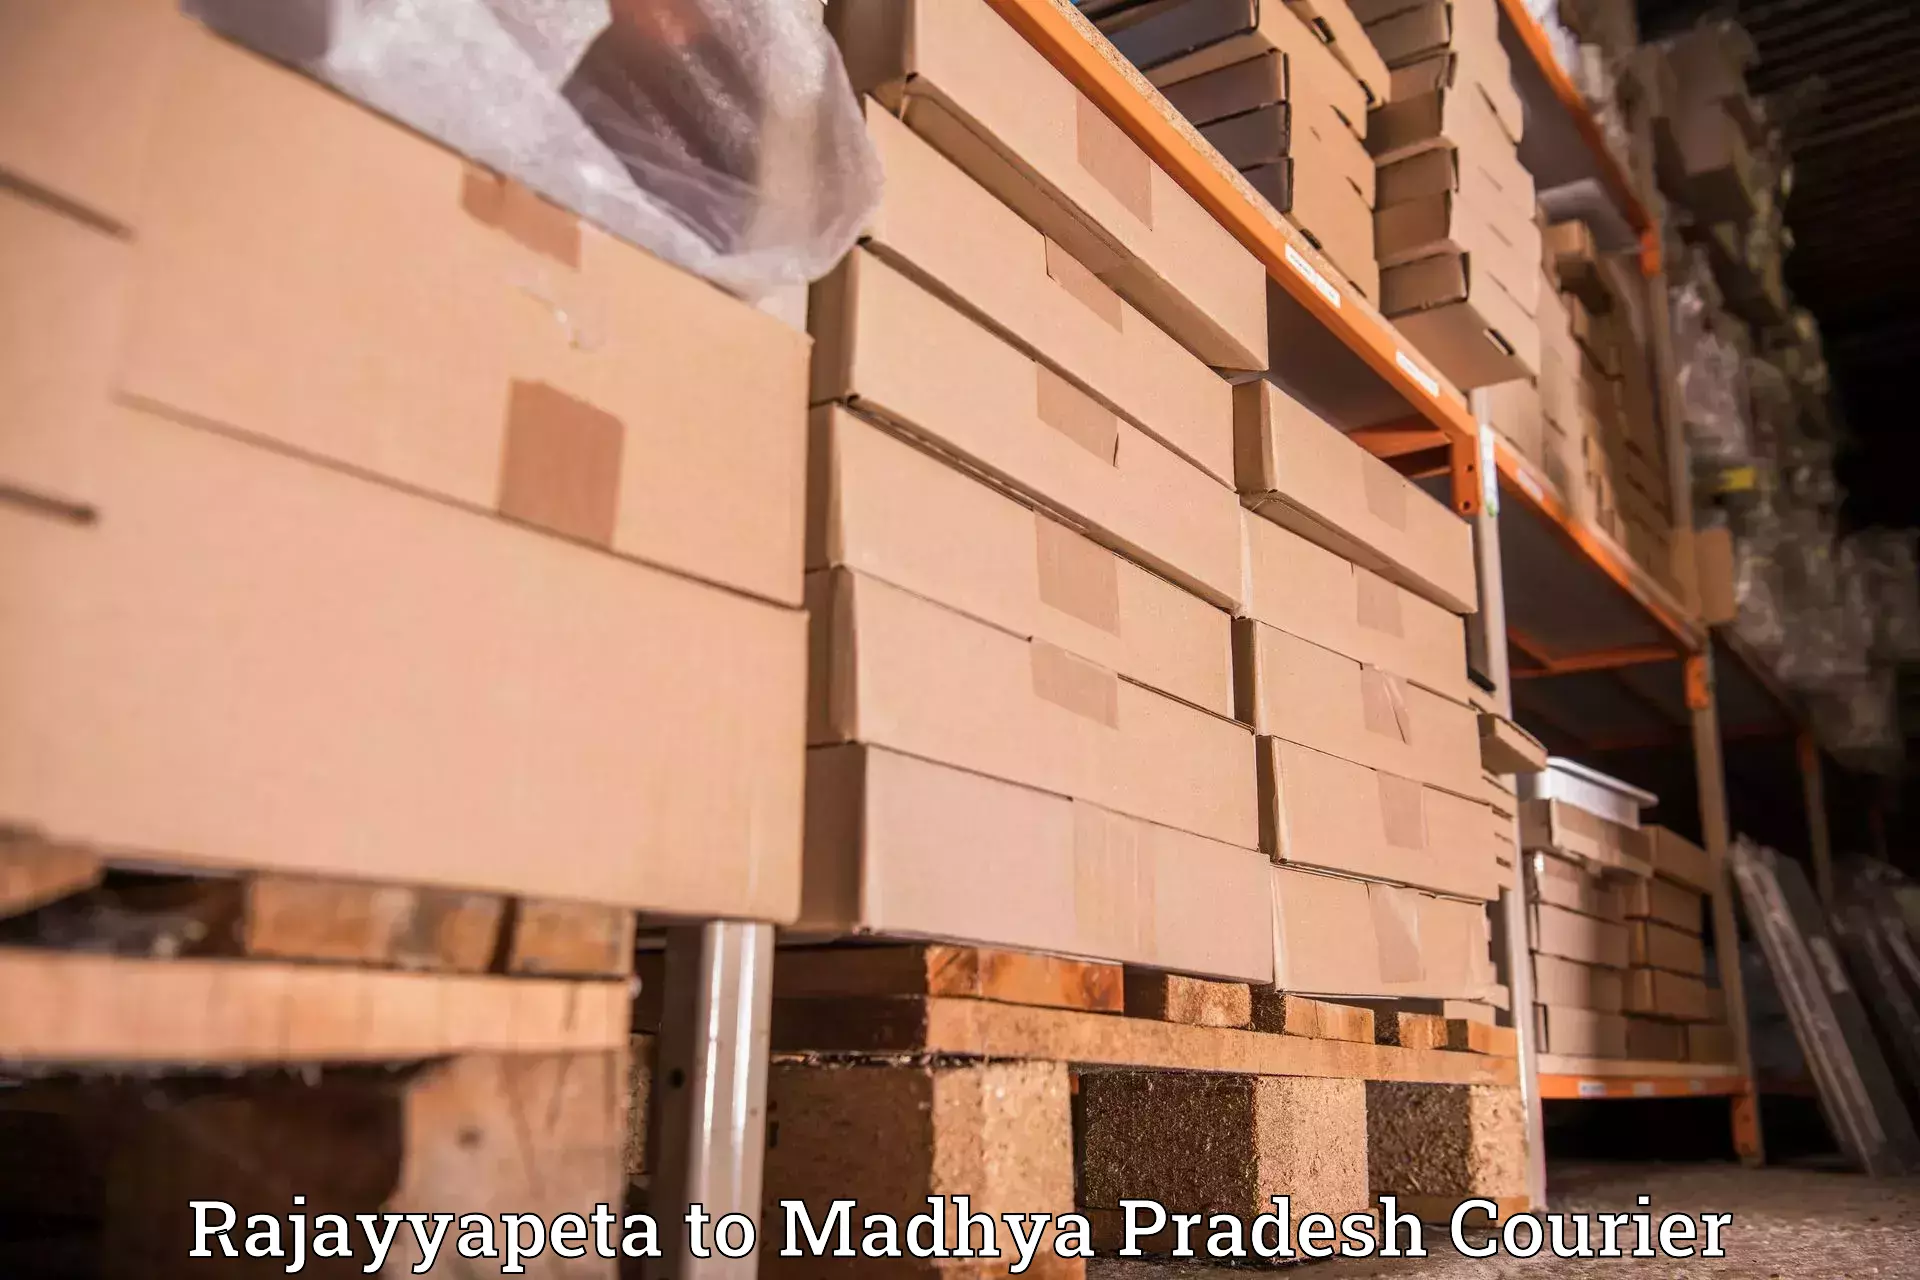 Sustainable courier practices Rajayyapeta to Sausar